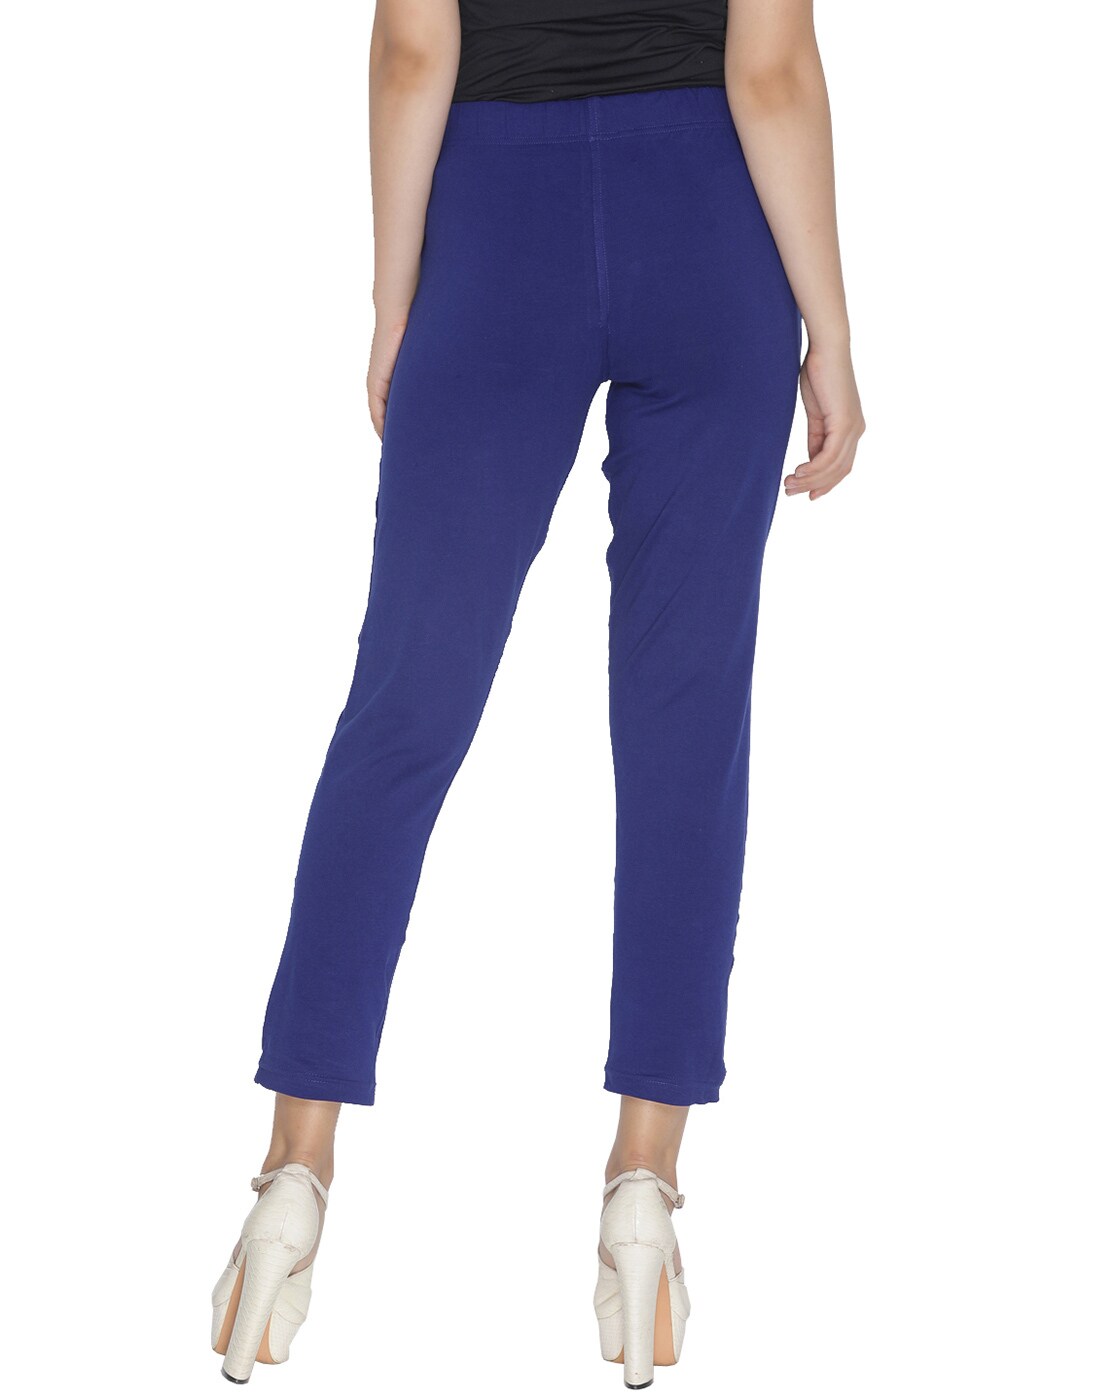 Lyra Women's Pants (LYRA_KURTIPANT_18_FS_1PC) - Parry Red (L) in Indore at  best price by Yogesh Enterprises - Justdial